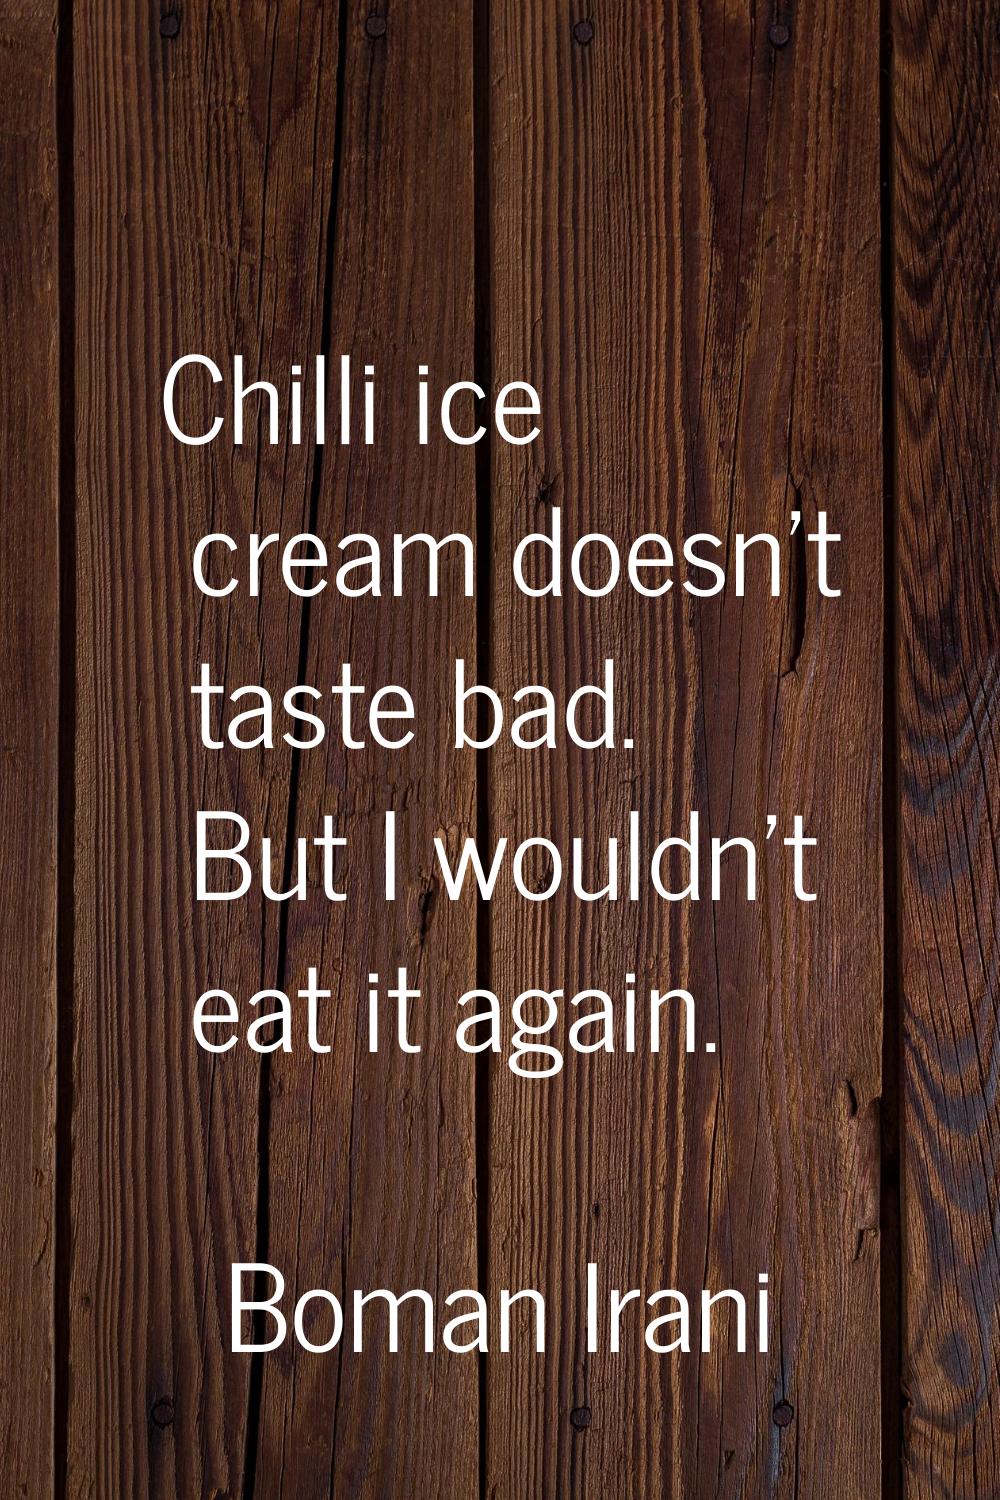 Chilli ice cream doesn't taste bad. But I wouldn't eat it again.